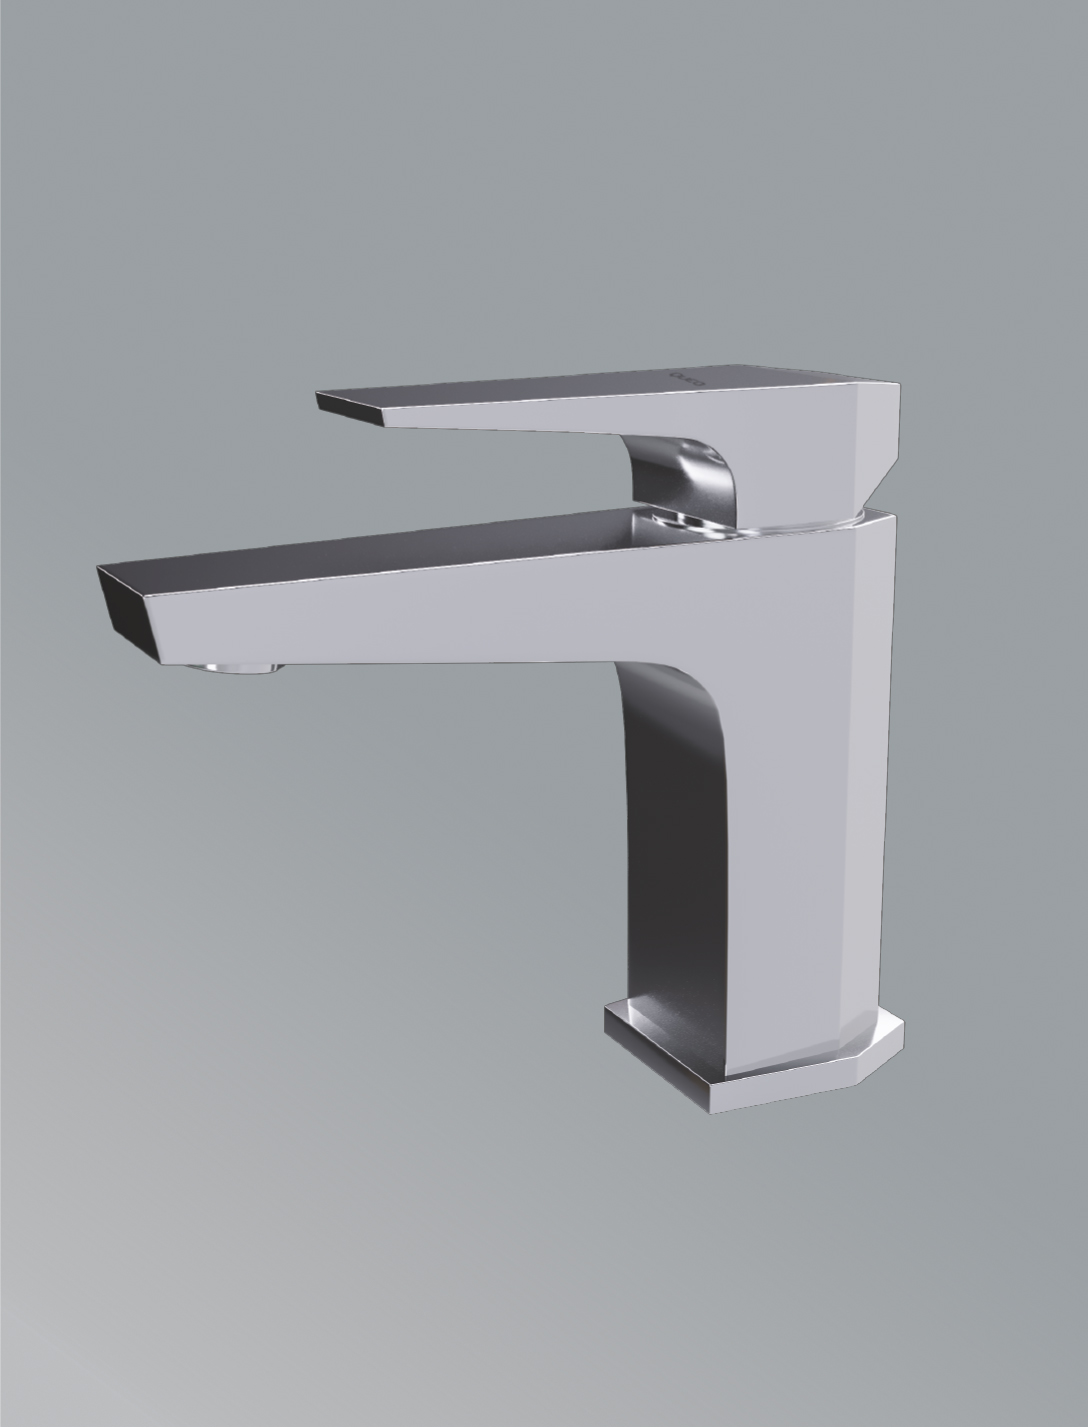 -single-control-basin-faucet-in-polished-chrome